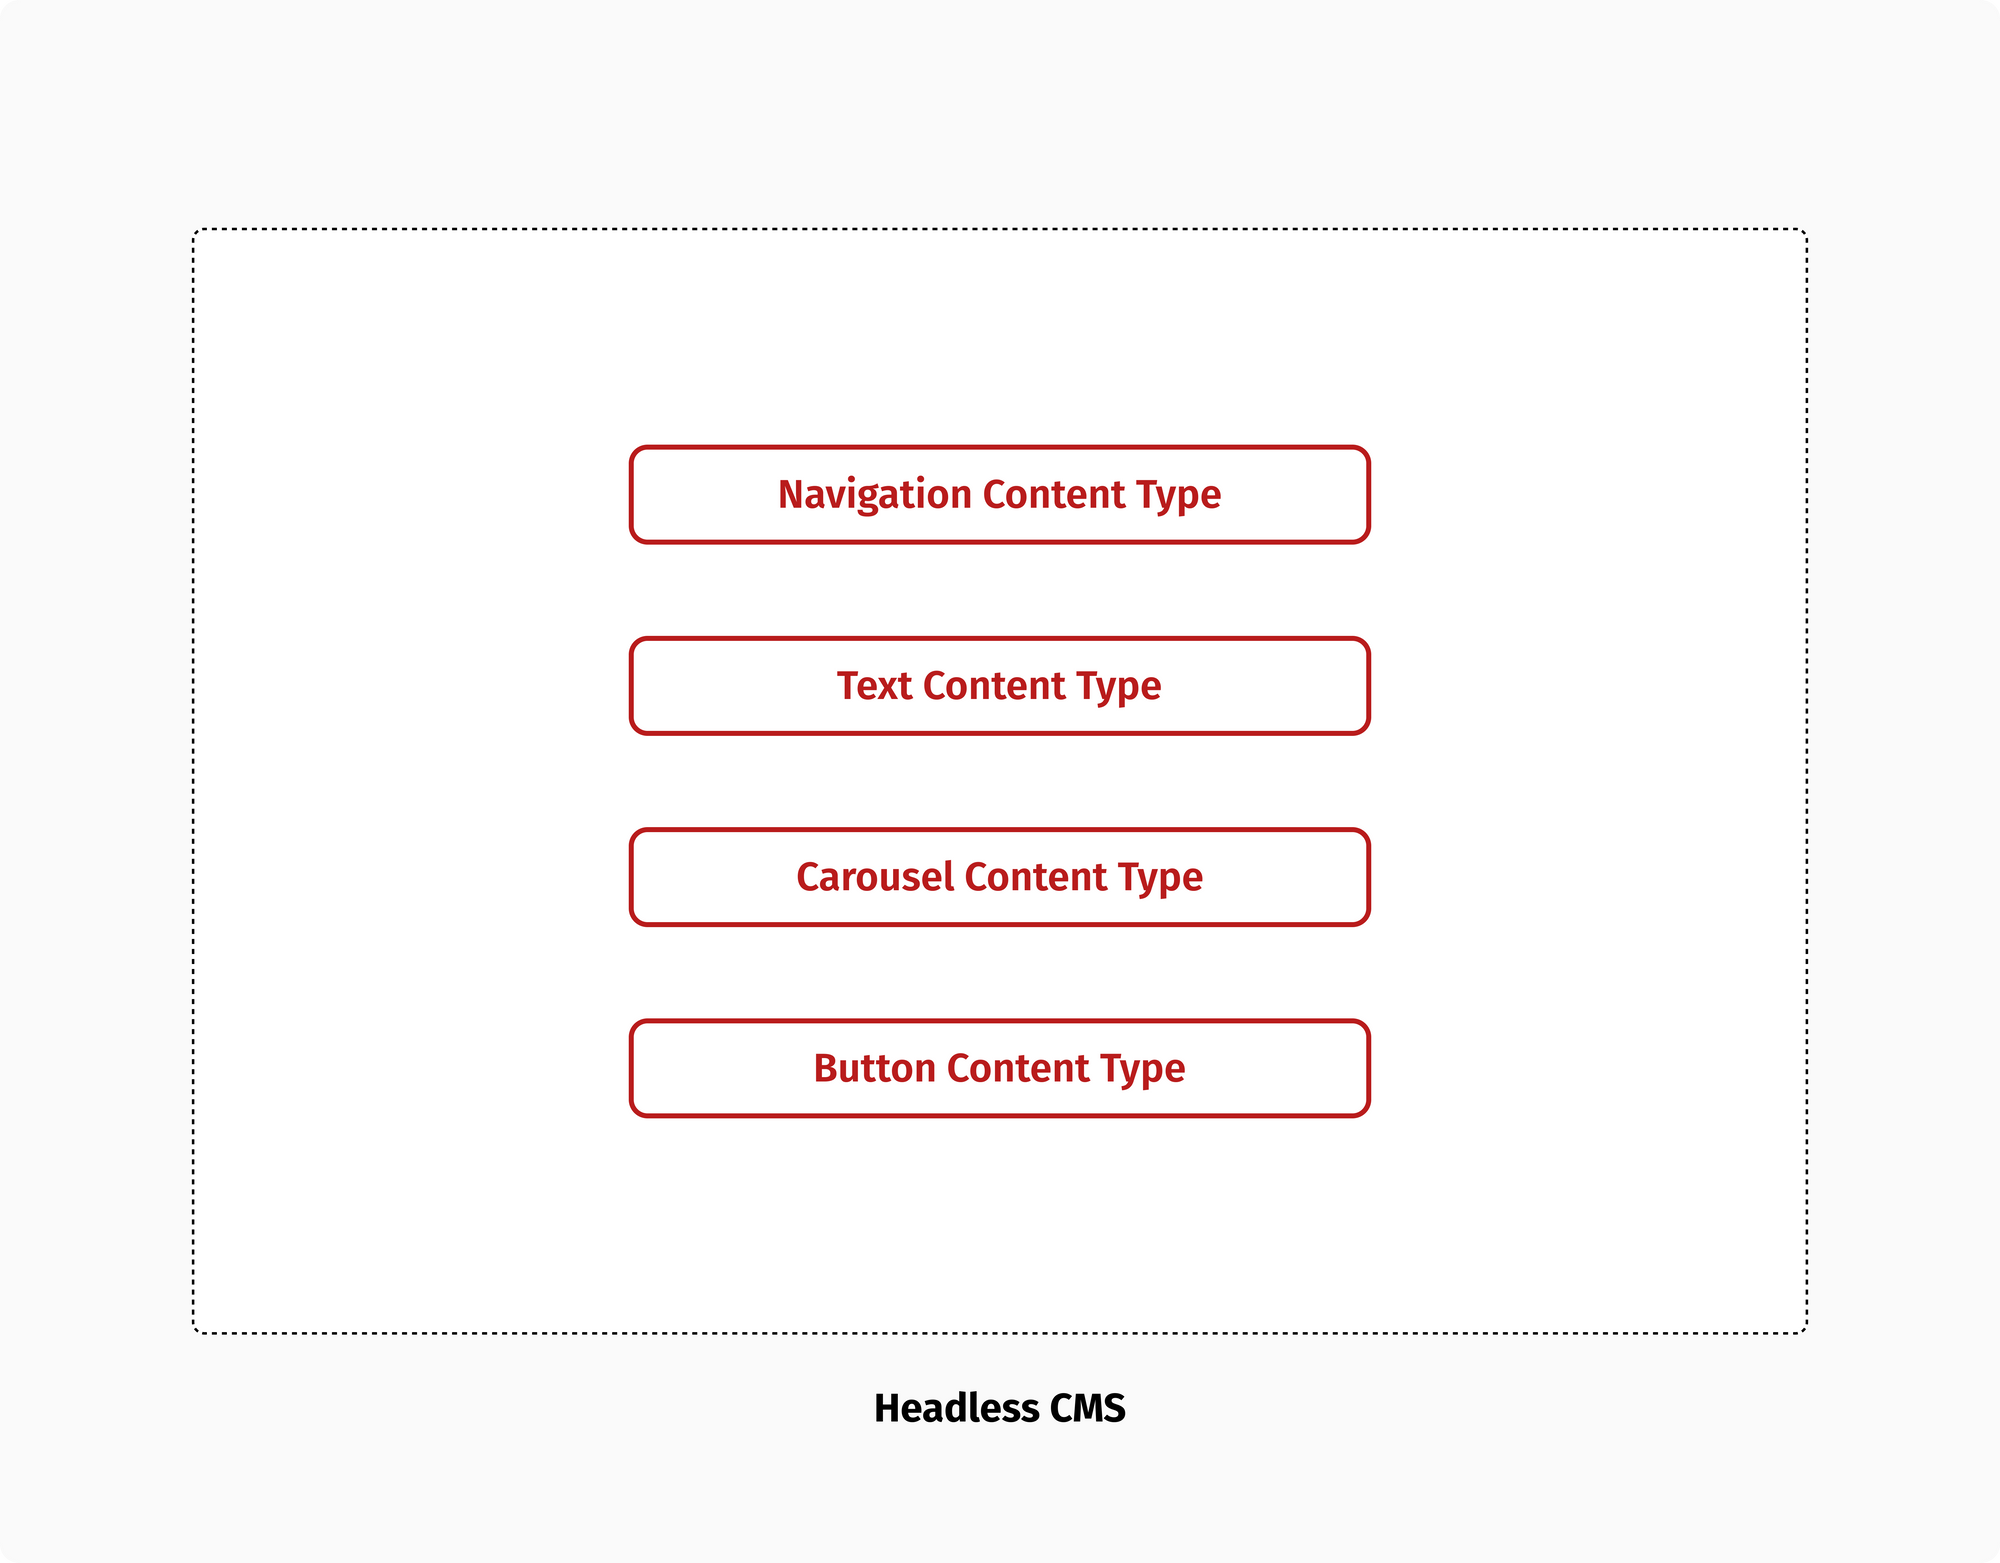 One-to-one mapping of content types and UI components.